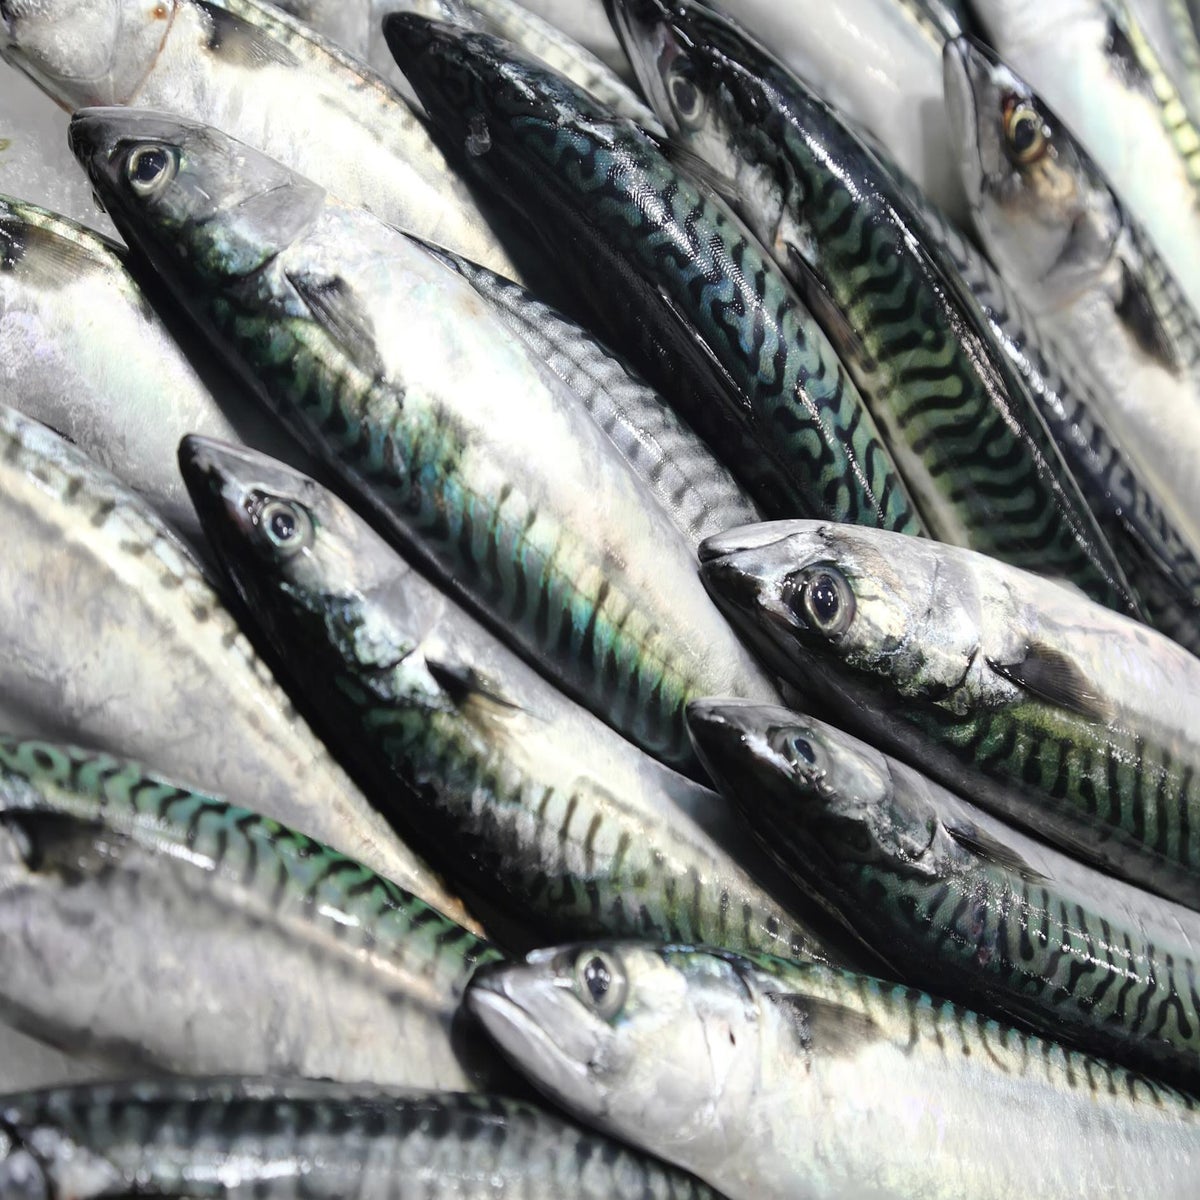 British mackerel has sustainable status stripped after years of